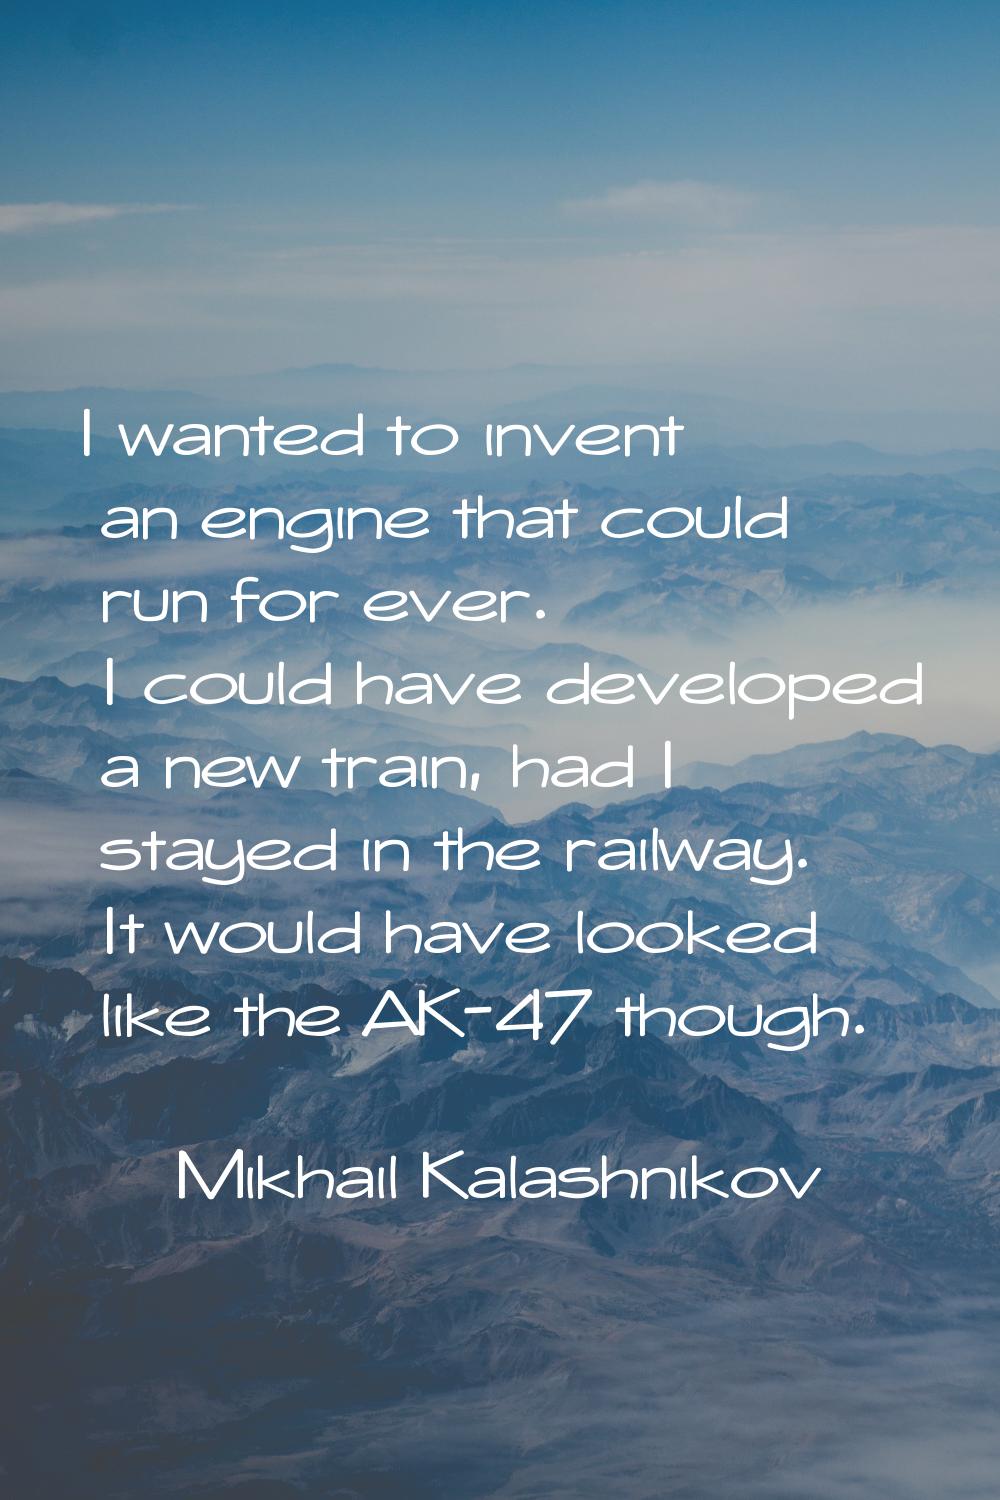 I wanted to invent an engine that could run for ever. I could have developed a new train, had I sta